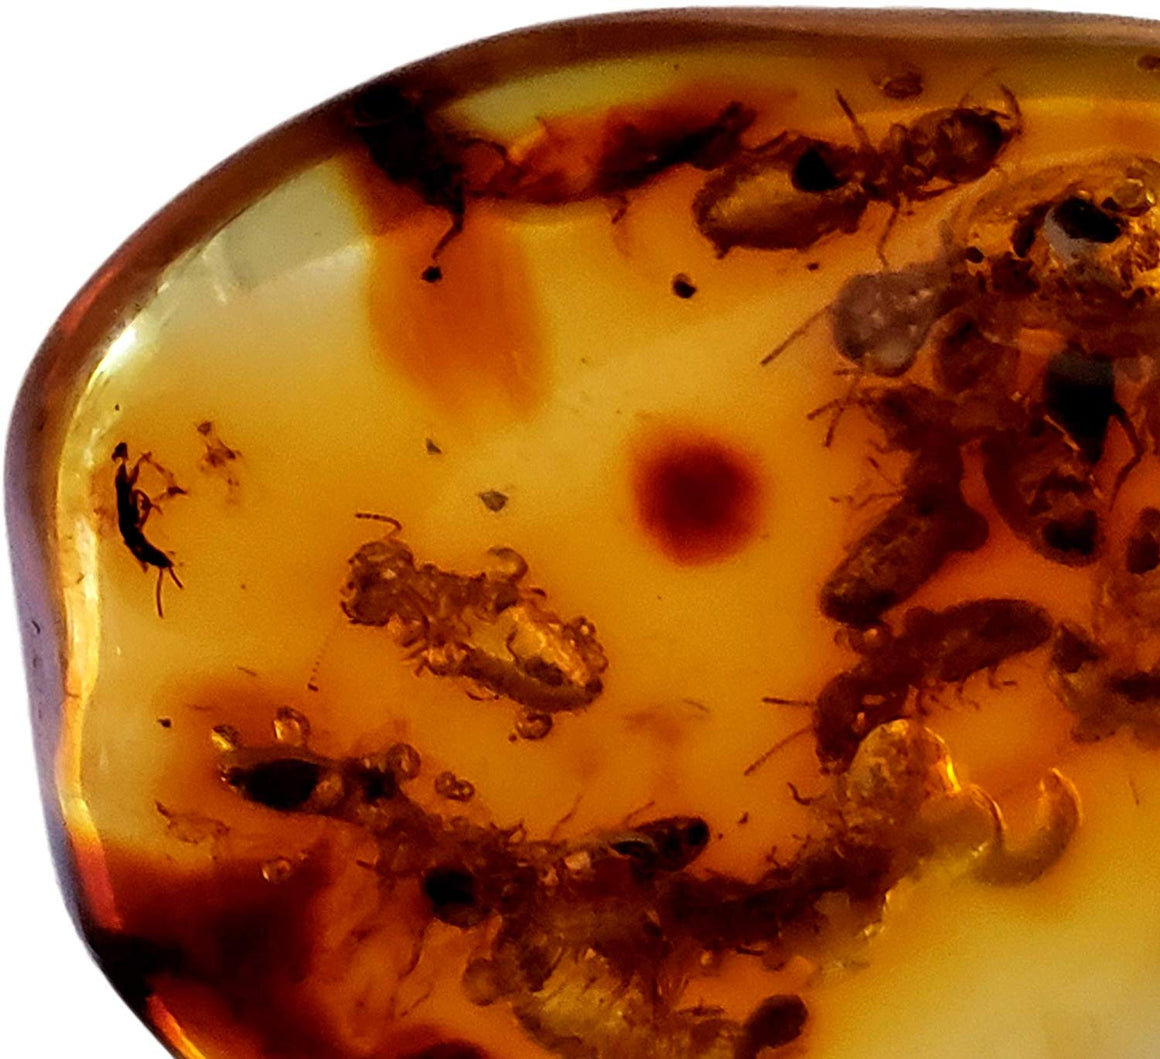 Genuine Amber Fossil Specimen - Multiple Insect Inclusions - Naturally Formed from Colombia with Bugs Inside - Museum Grade, A-Grade - Great Collectible - Piece #13 (25mm x 23mm) - dinosaursrocksuperstore